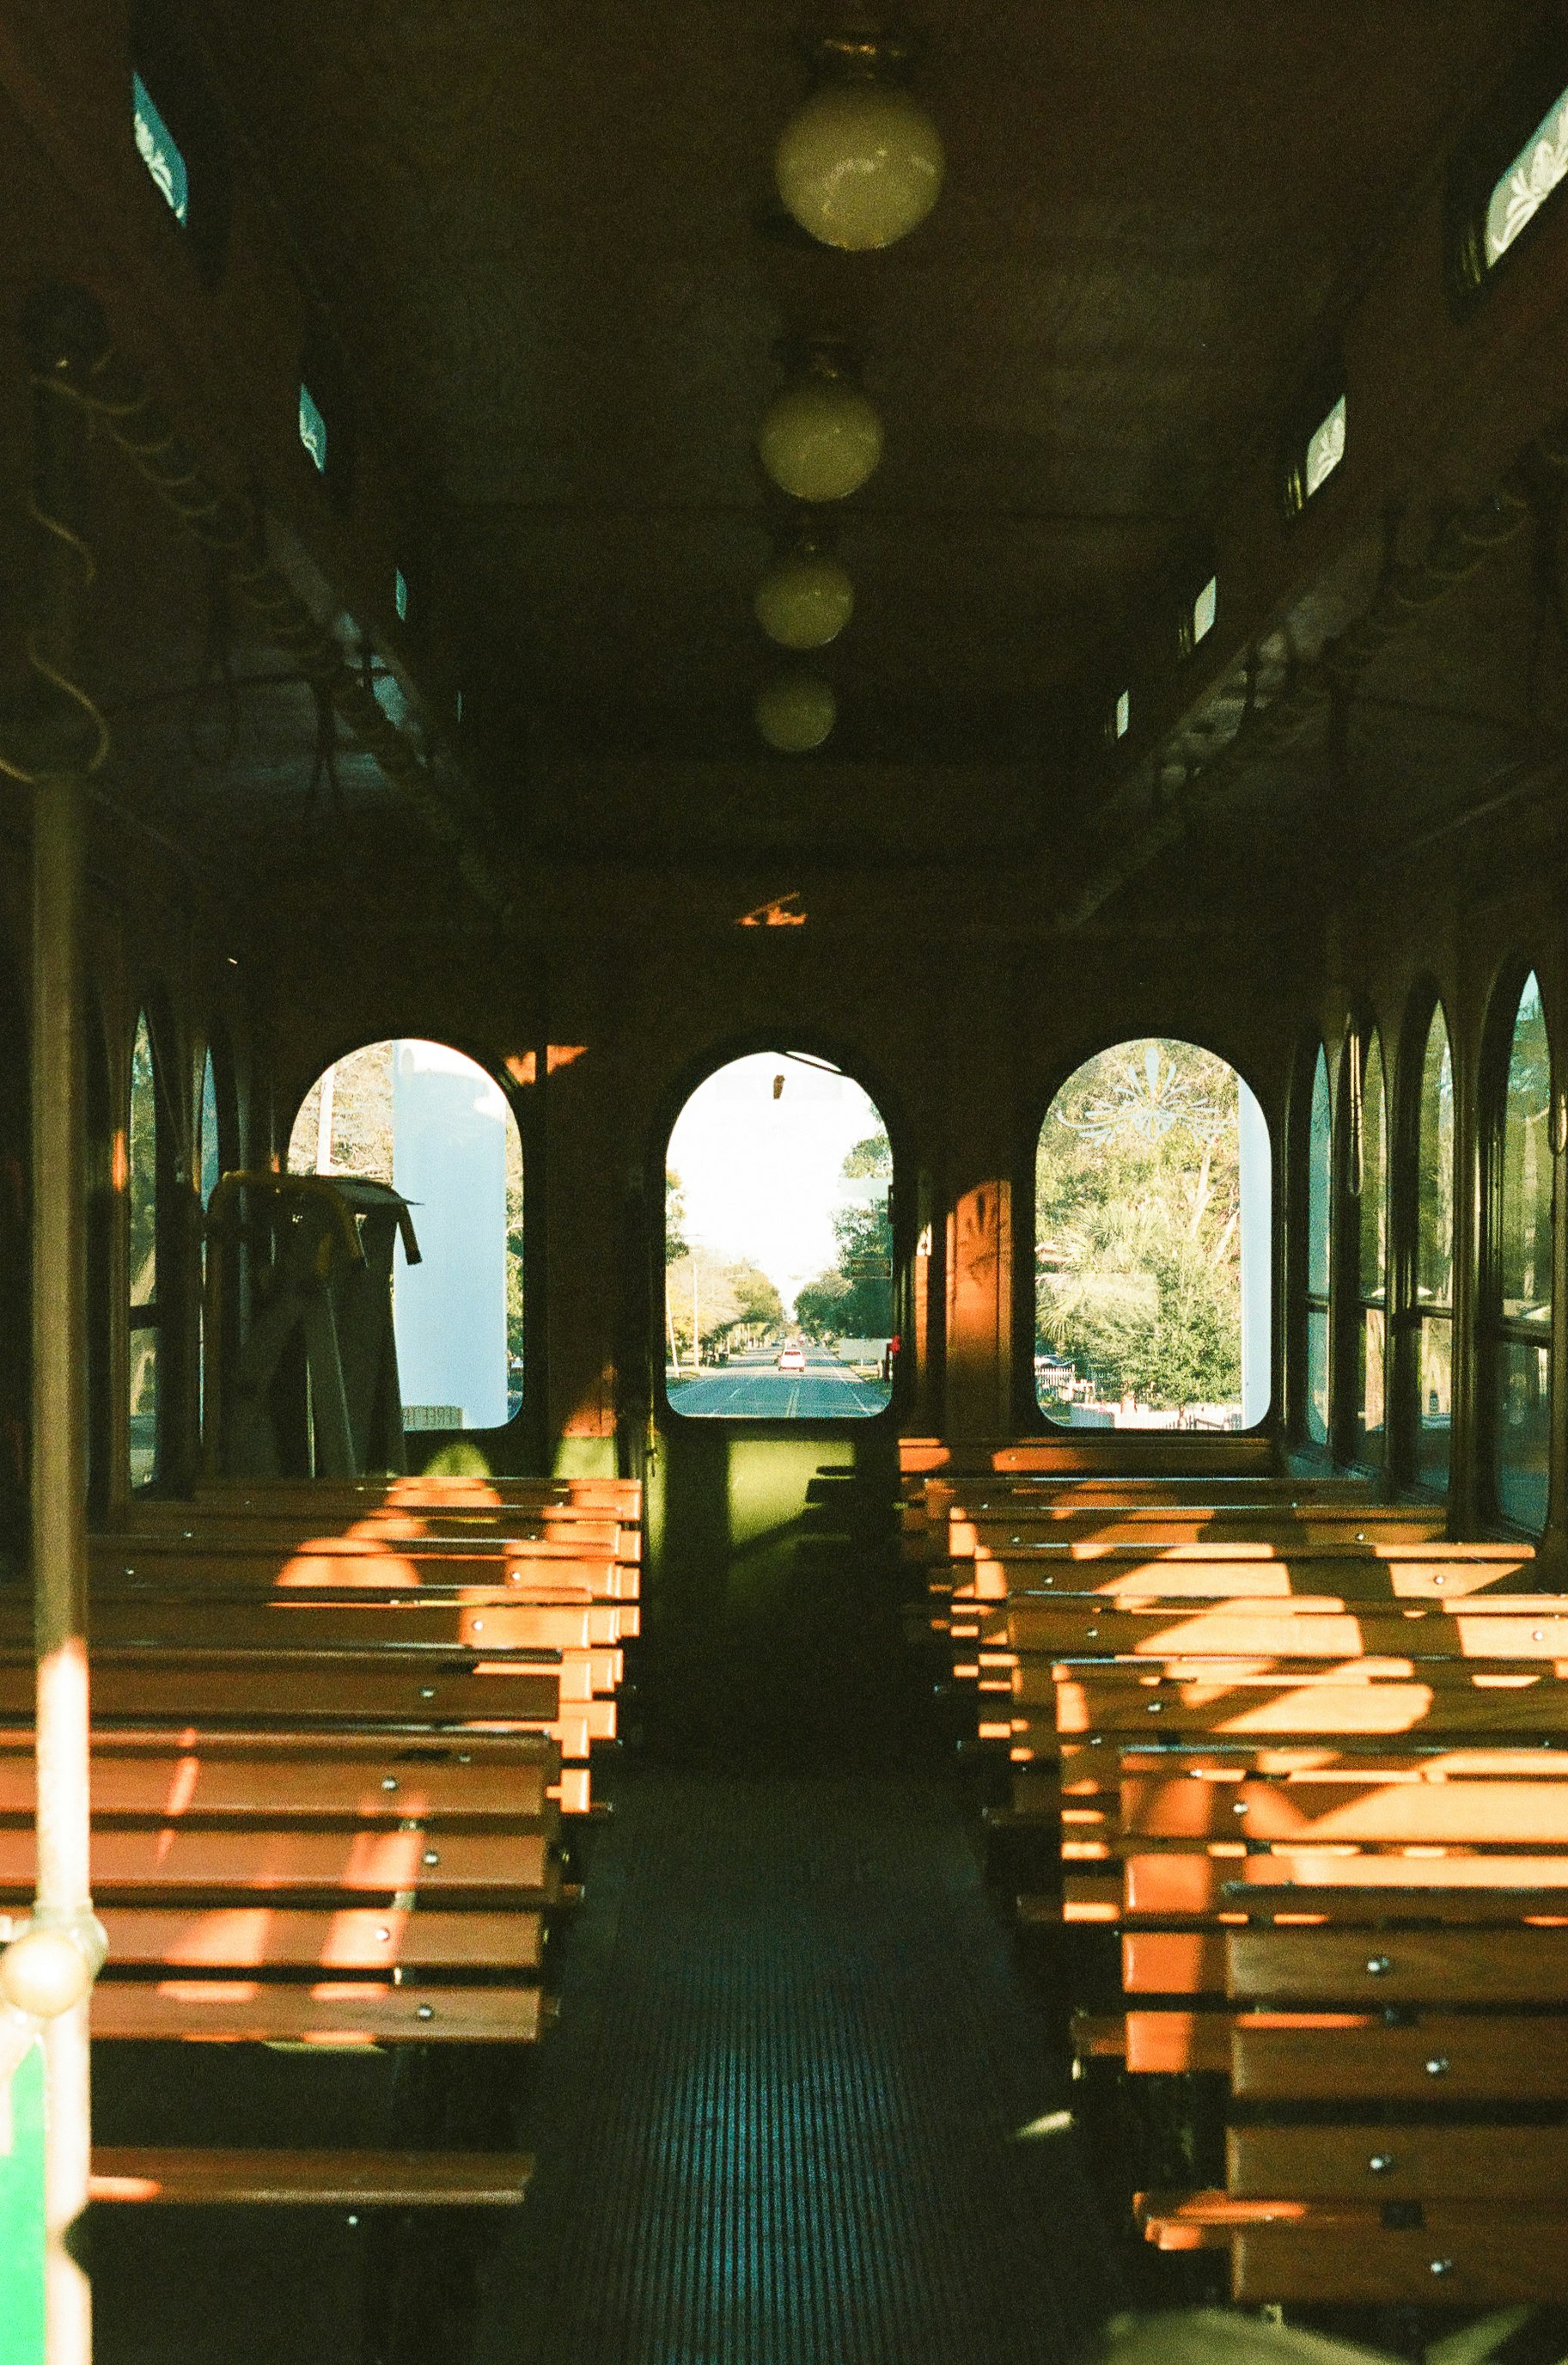 brown wooden benches inside building